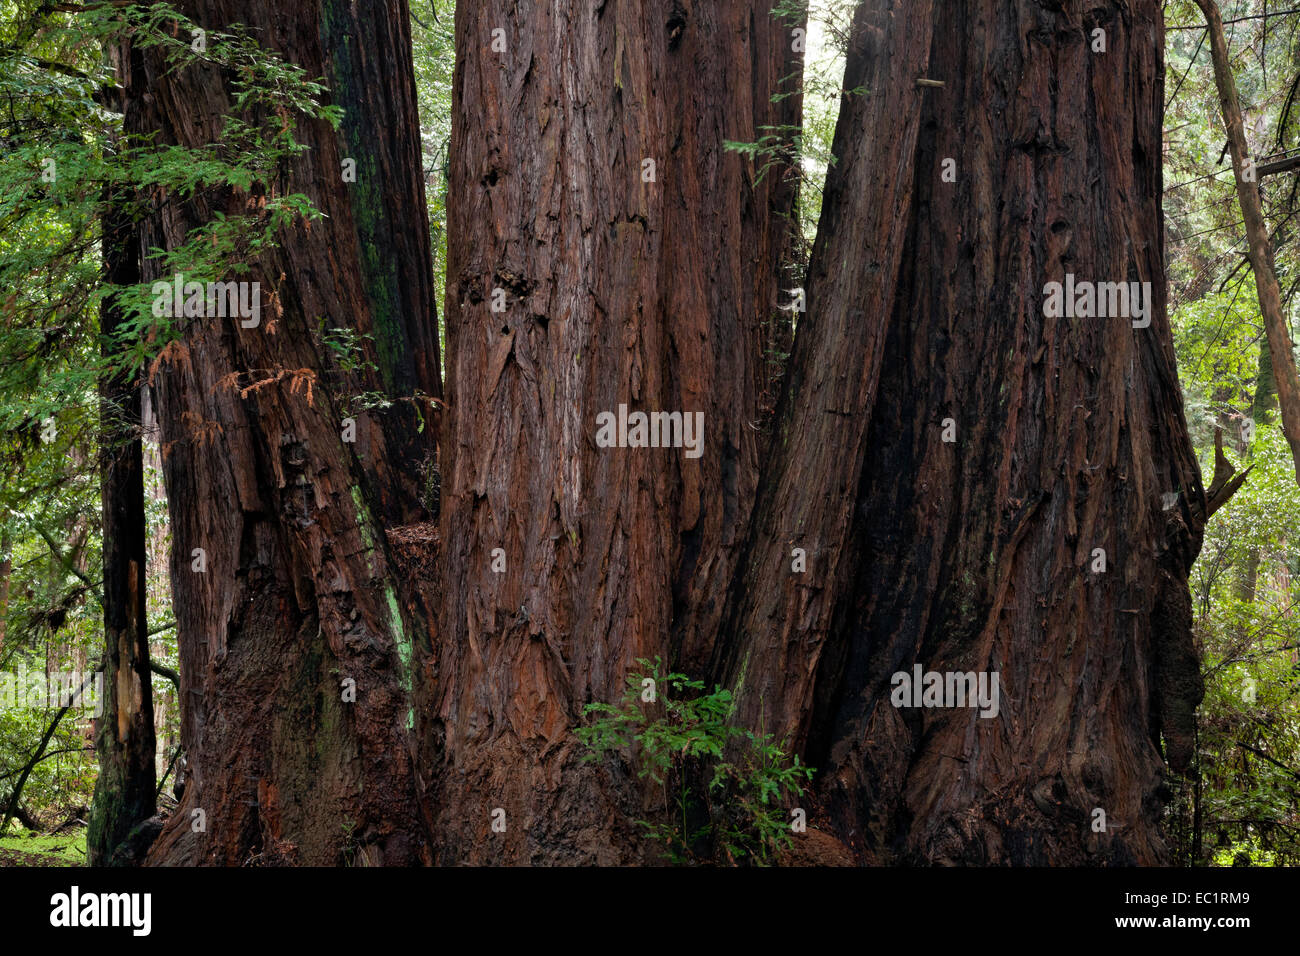 CA02453-00...CALIFORNIA - stretto intrico di Redwood alberi lungo il Redwood Grove Loop Trail in Henry Cowell Redwoods State Park. Foto Stock